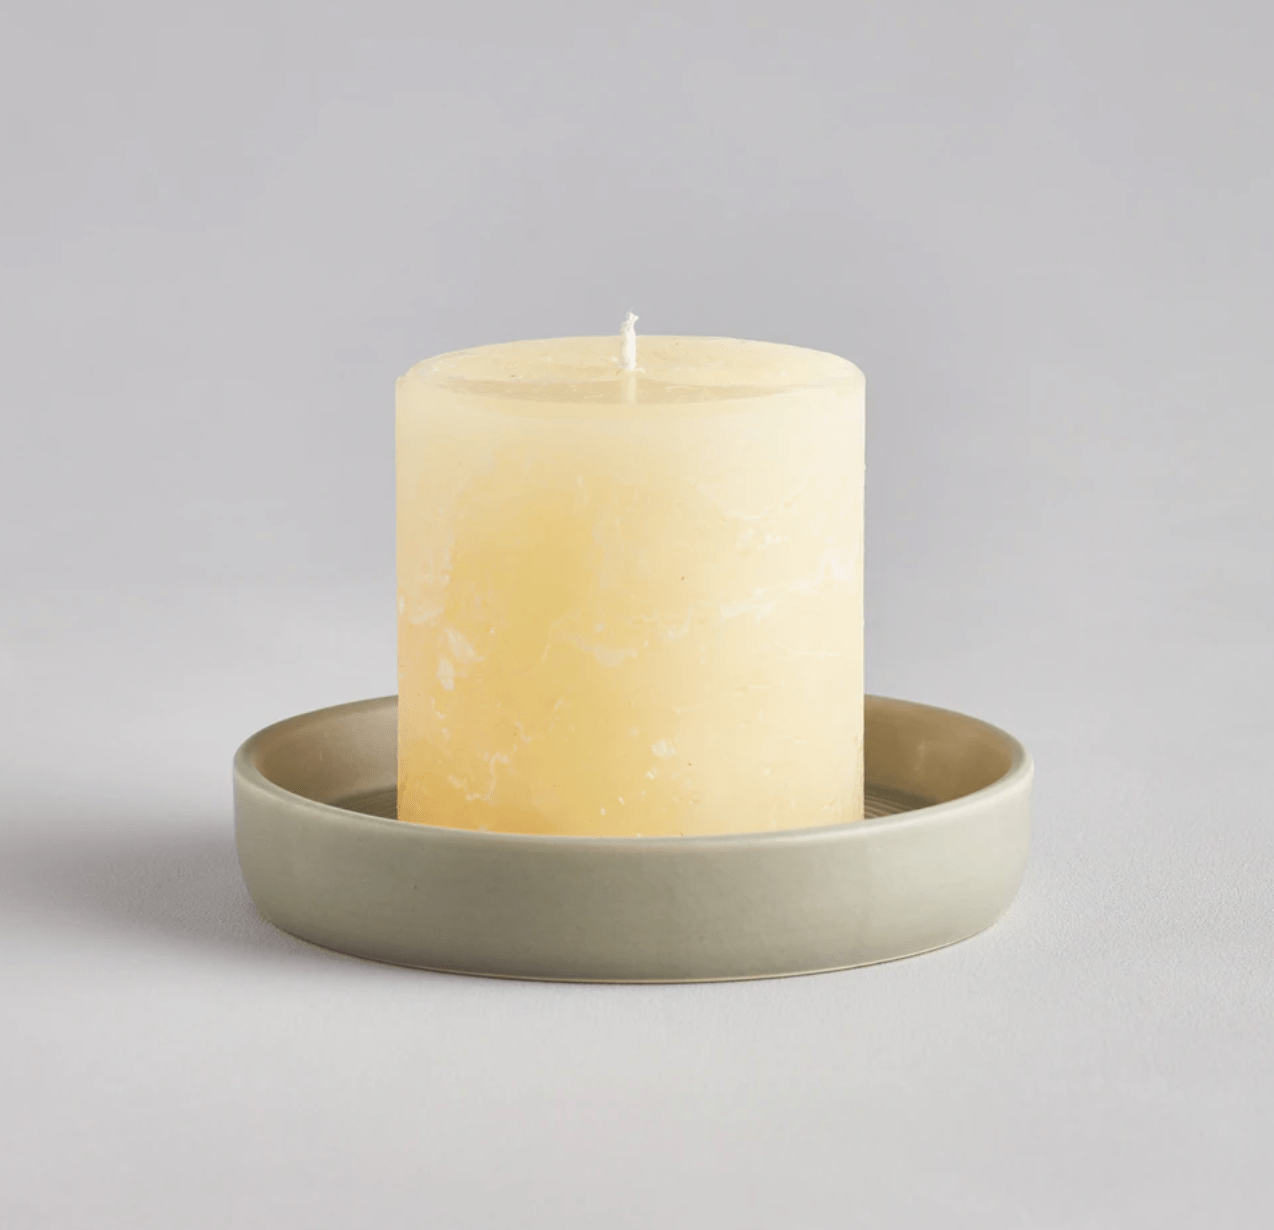 St. Eval Light Grey-Green Candle Plate 13cm x 2.5cm with small pillar candle